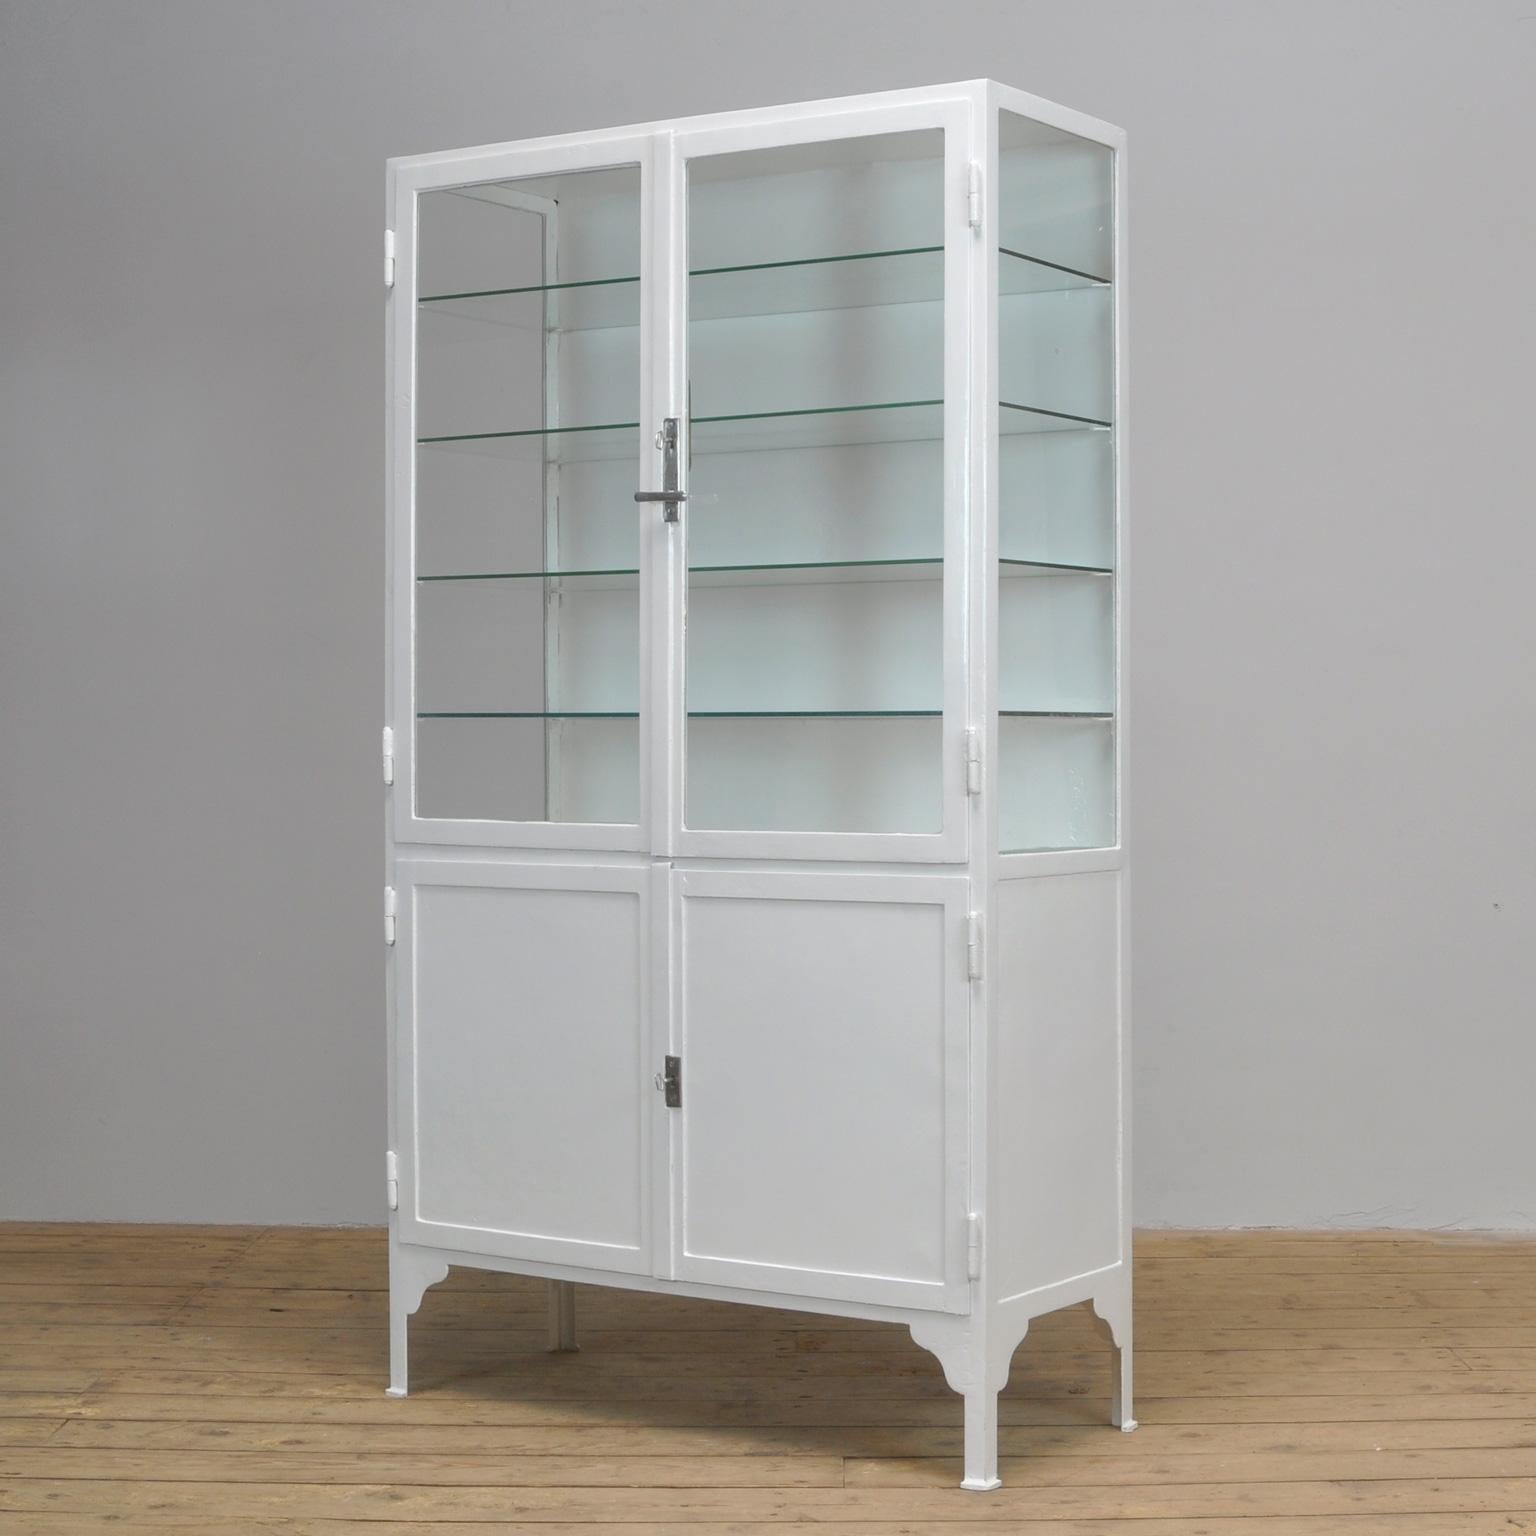 This former medical cabinet was produced in the 1940s in Hungary. It is made of thick iron and antique glass. In the upper part, there are four new glass shelves. The original locks are in perfect working condition.
The cabinet has been repainted